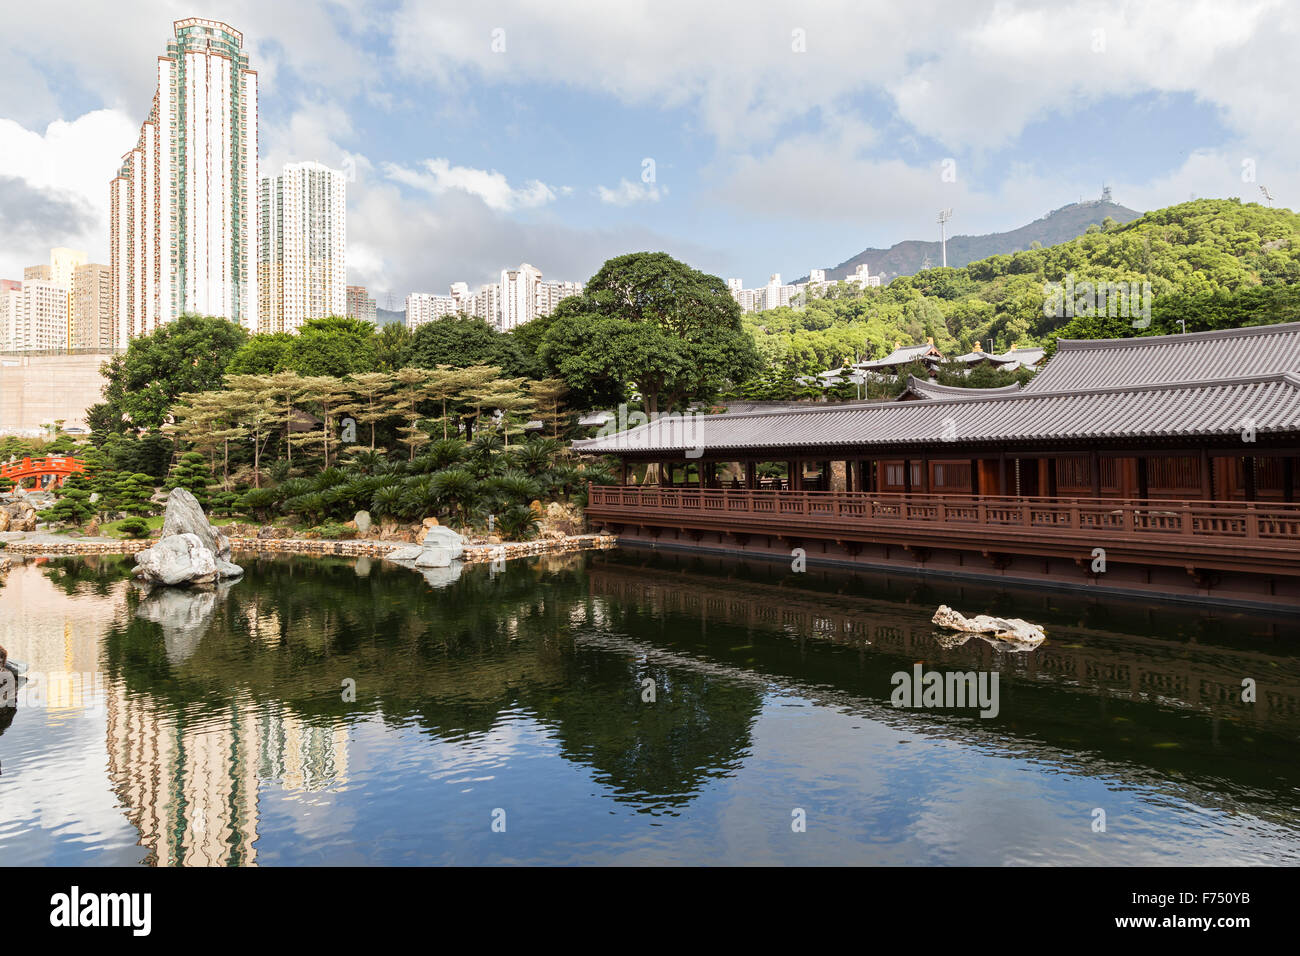 Pond and traditional wooden tea house at the Nan Lian Garden in Hong Kong, China. Stock Photo